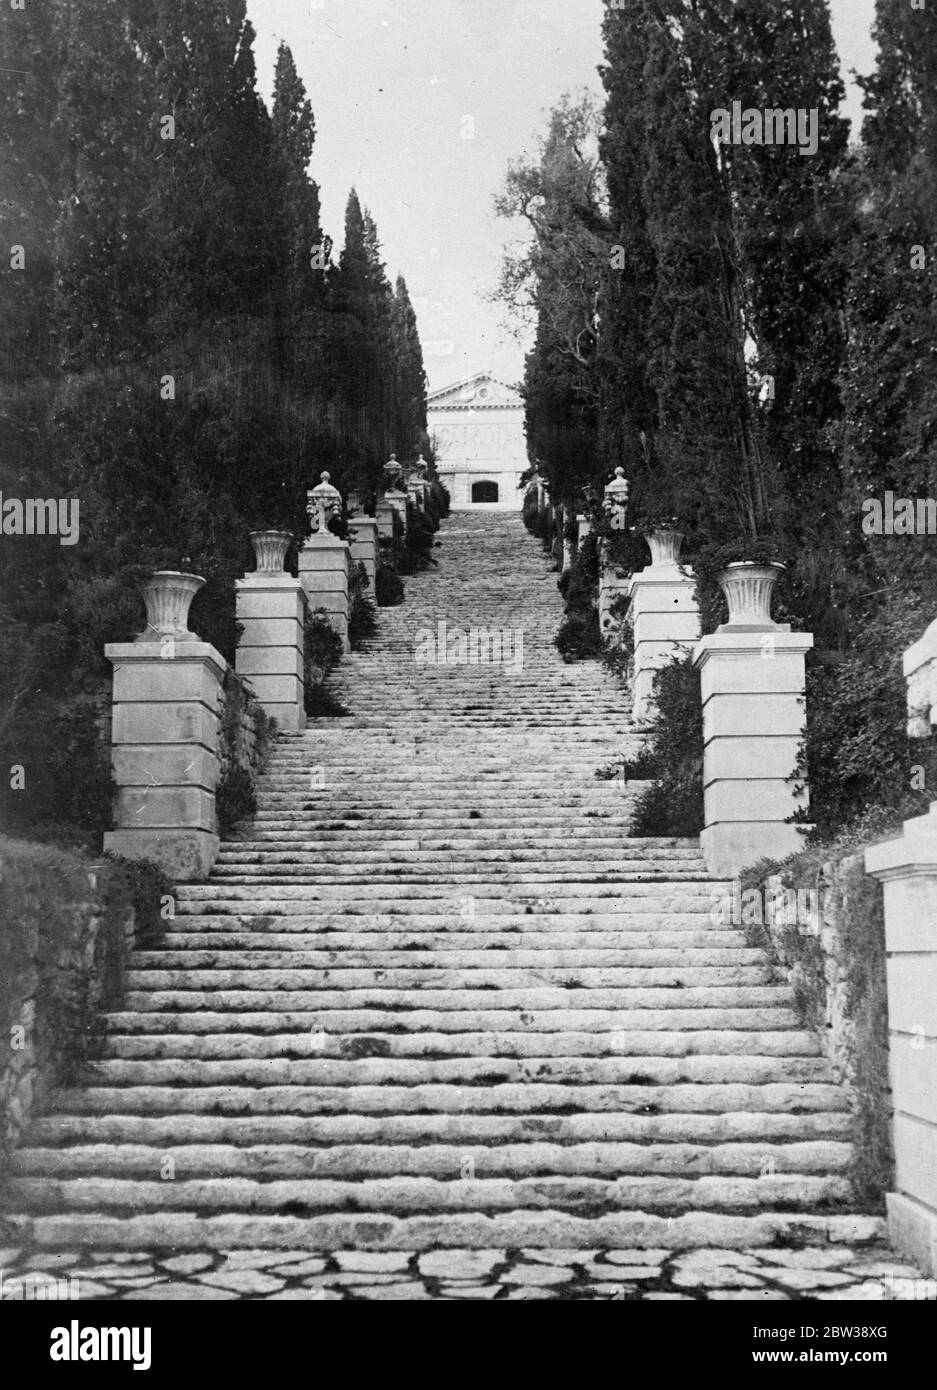 Princess Royal ' s new Riviera home . The beautiful Villa ' La Leopolda ' at Beaulieu Sur Mer , France on the French Riviera has just been purchased for the Princess Royal . Photo shows ; the monumental flight of steps rising from the shores of the sea to the villa itself . 10 January 1934 30s, 30's, 1930s, 1930's, thirties, nineteen thirties Stock Photo